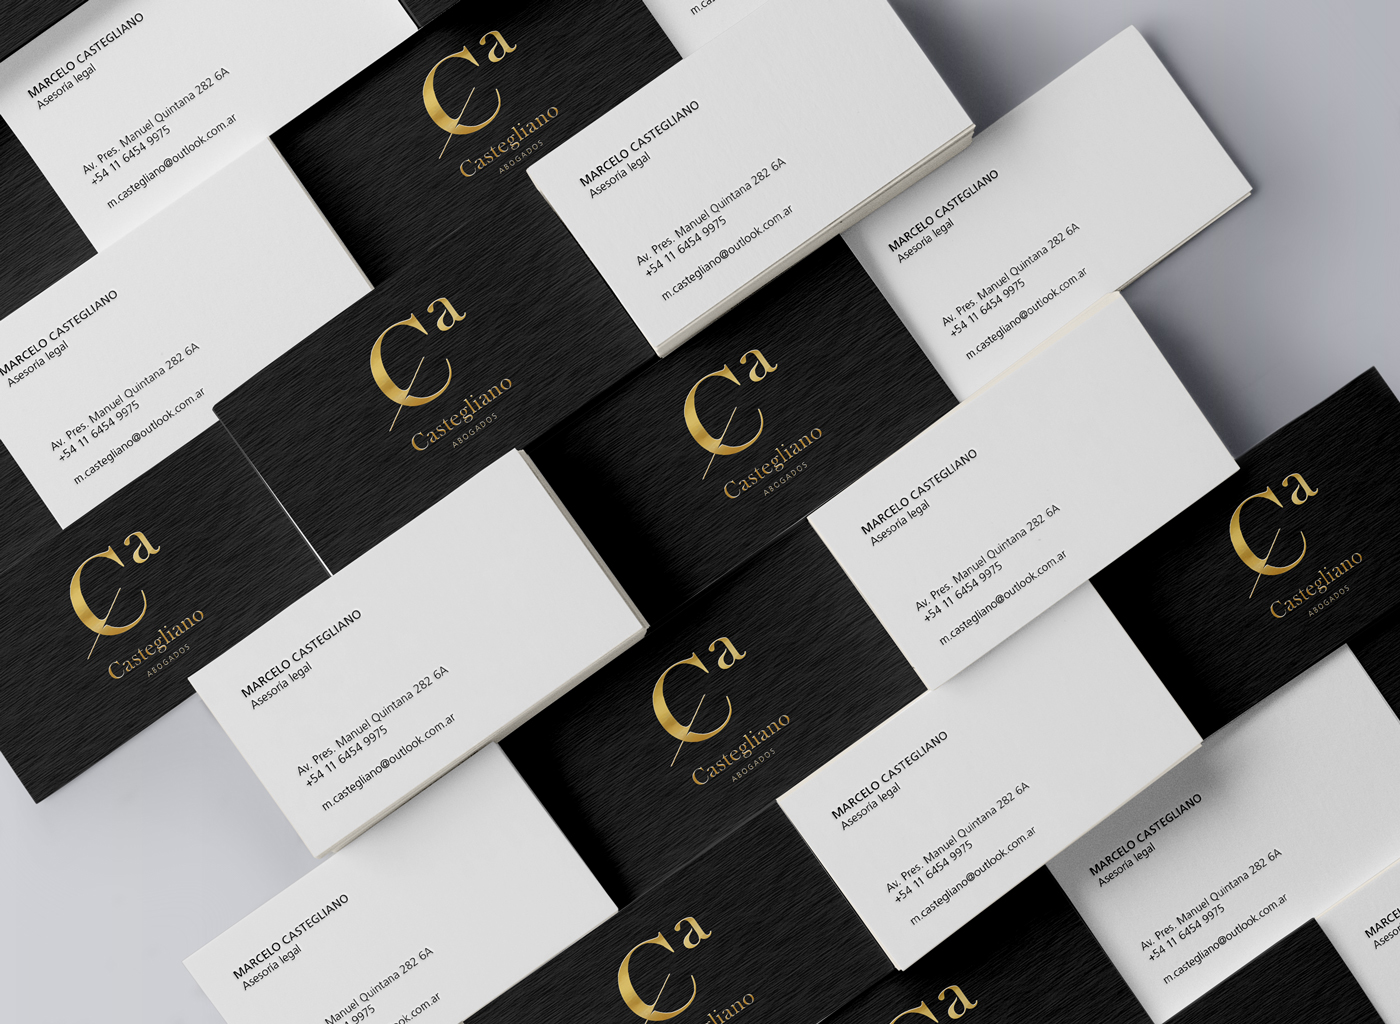 castegliano abogados identidad brand logo minimal black and white gold clean White simple type business card paper